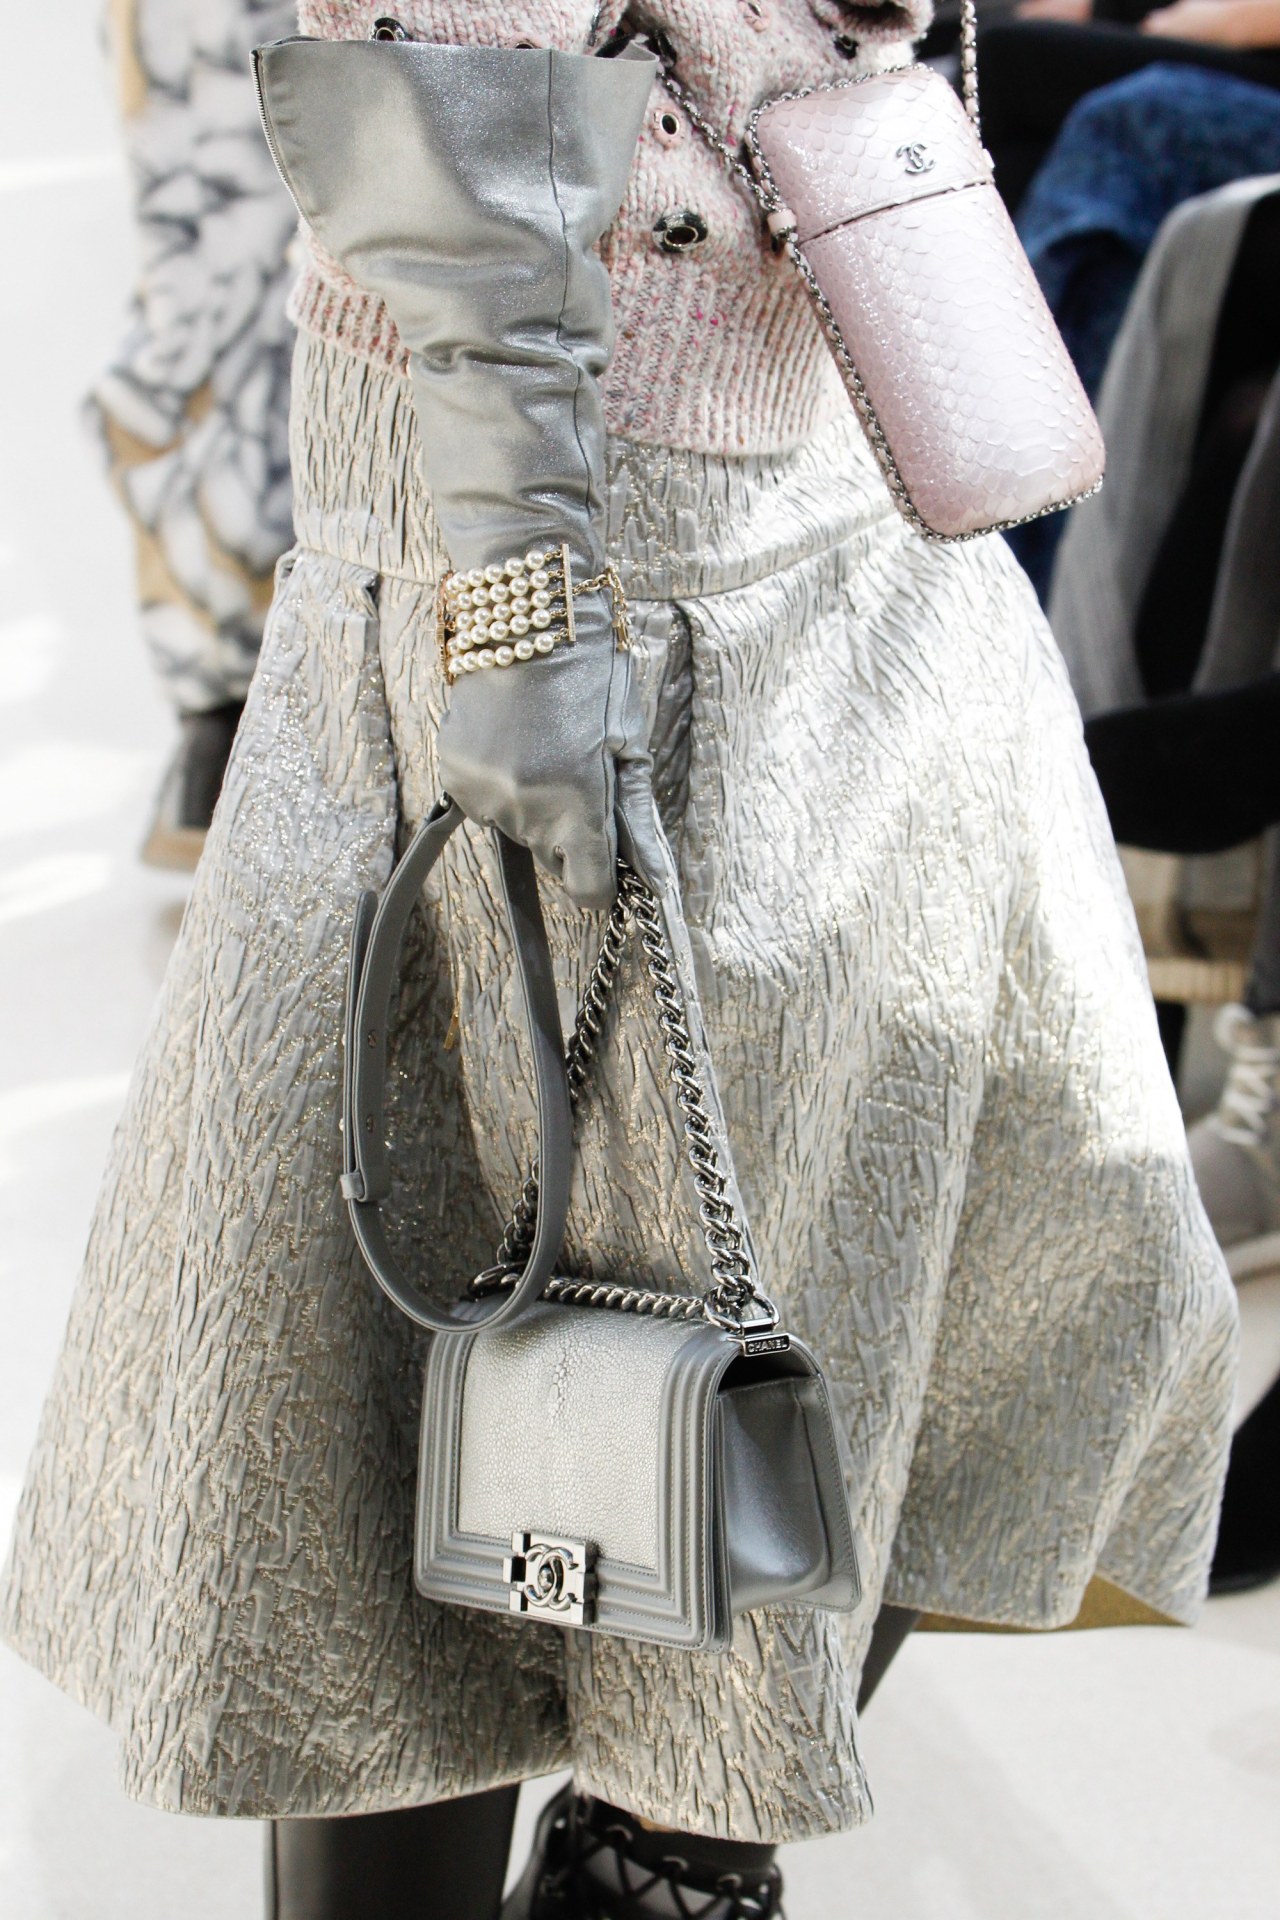 Vogue Runway — Details from the Chanel runway. More: here.